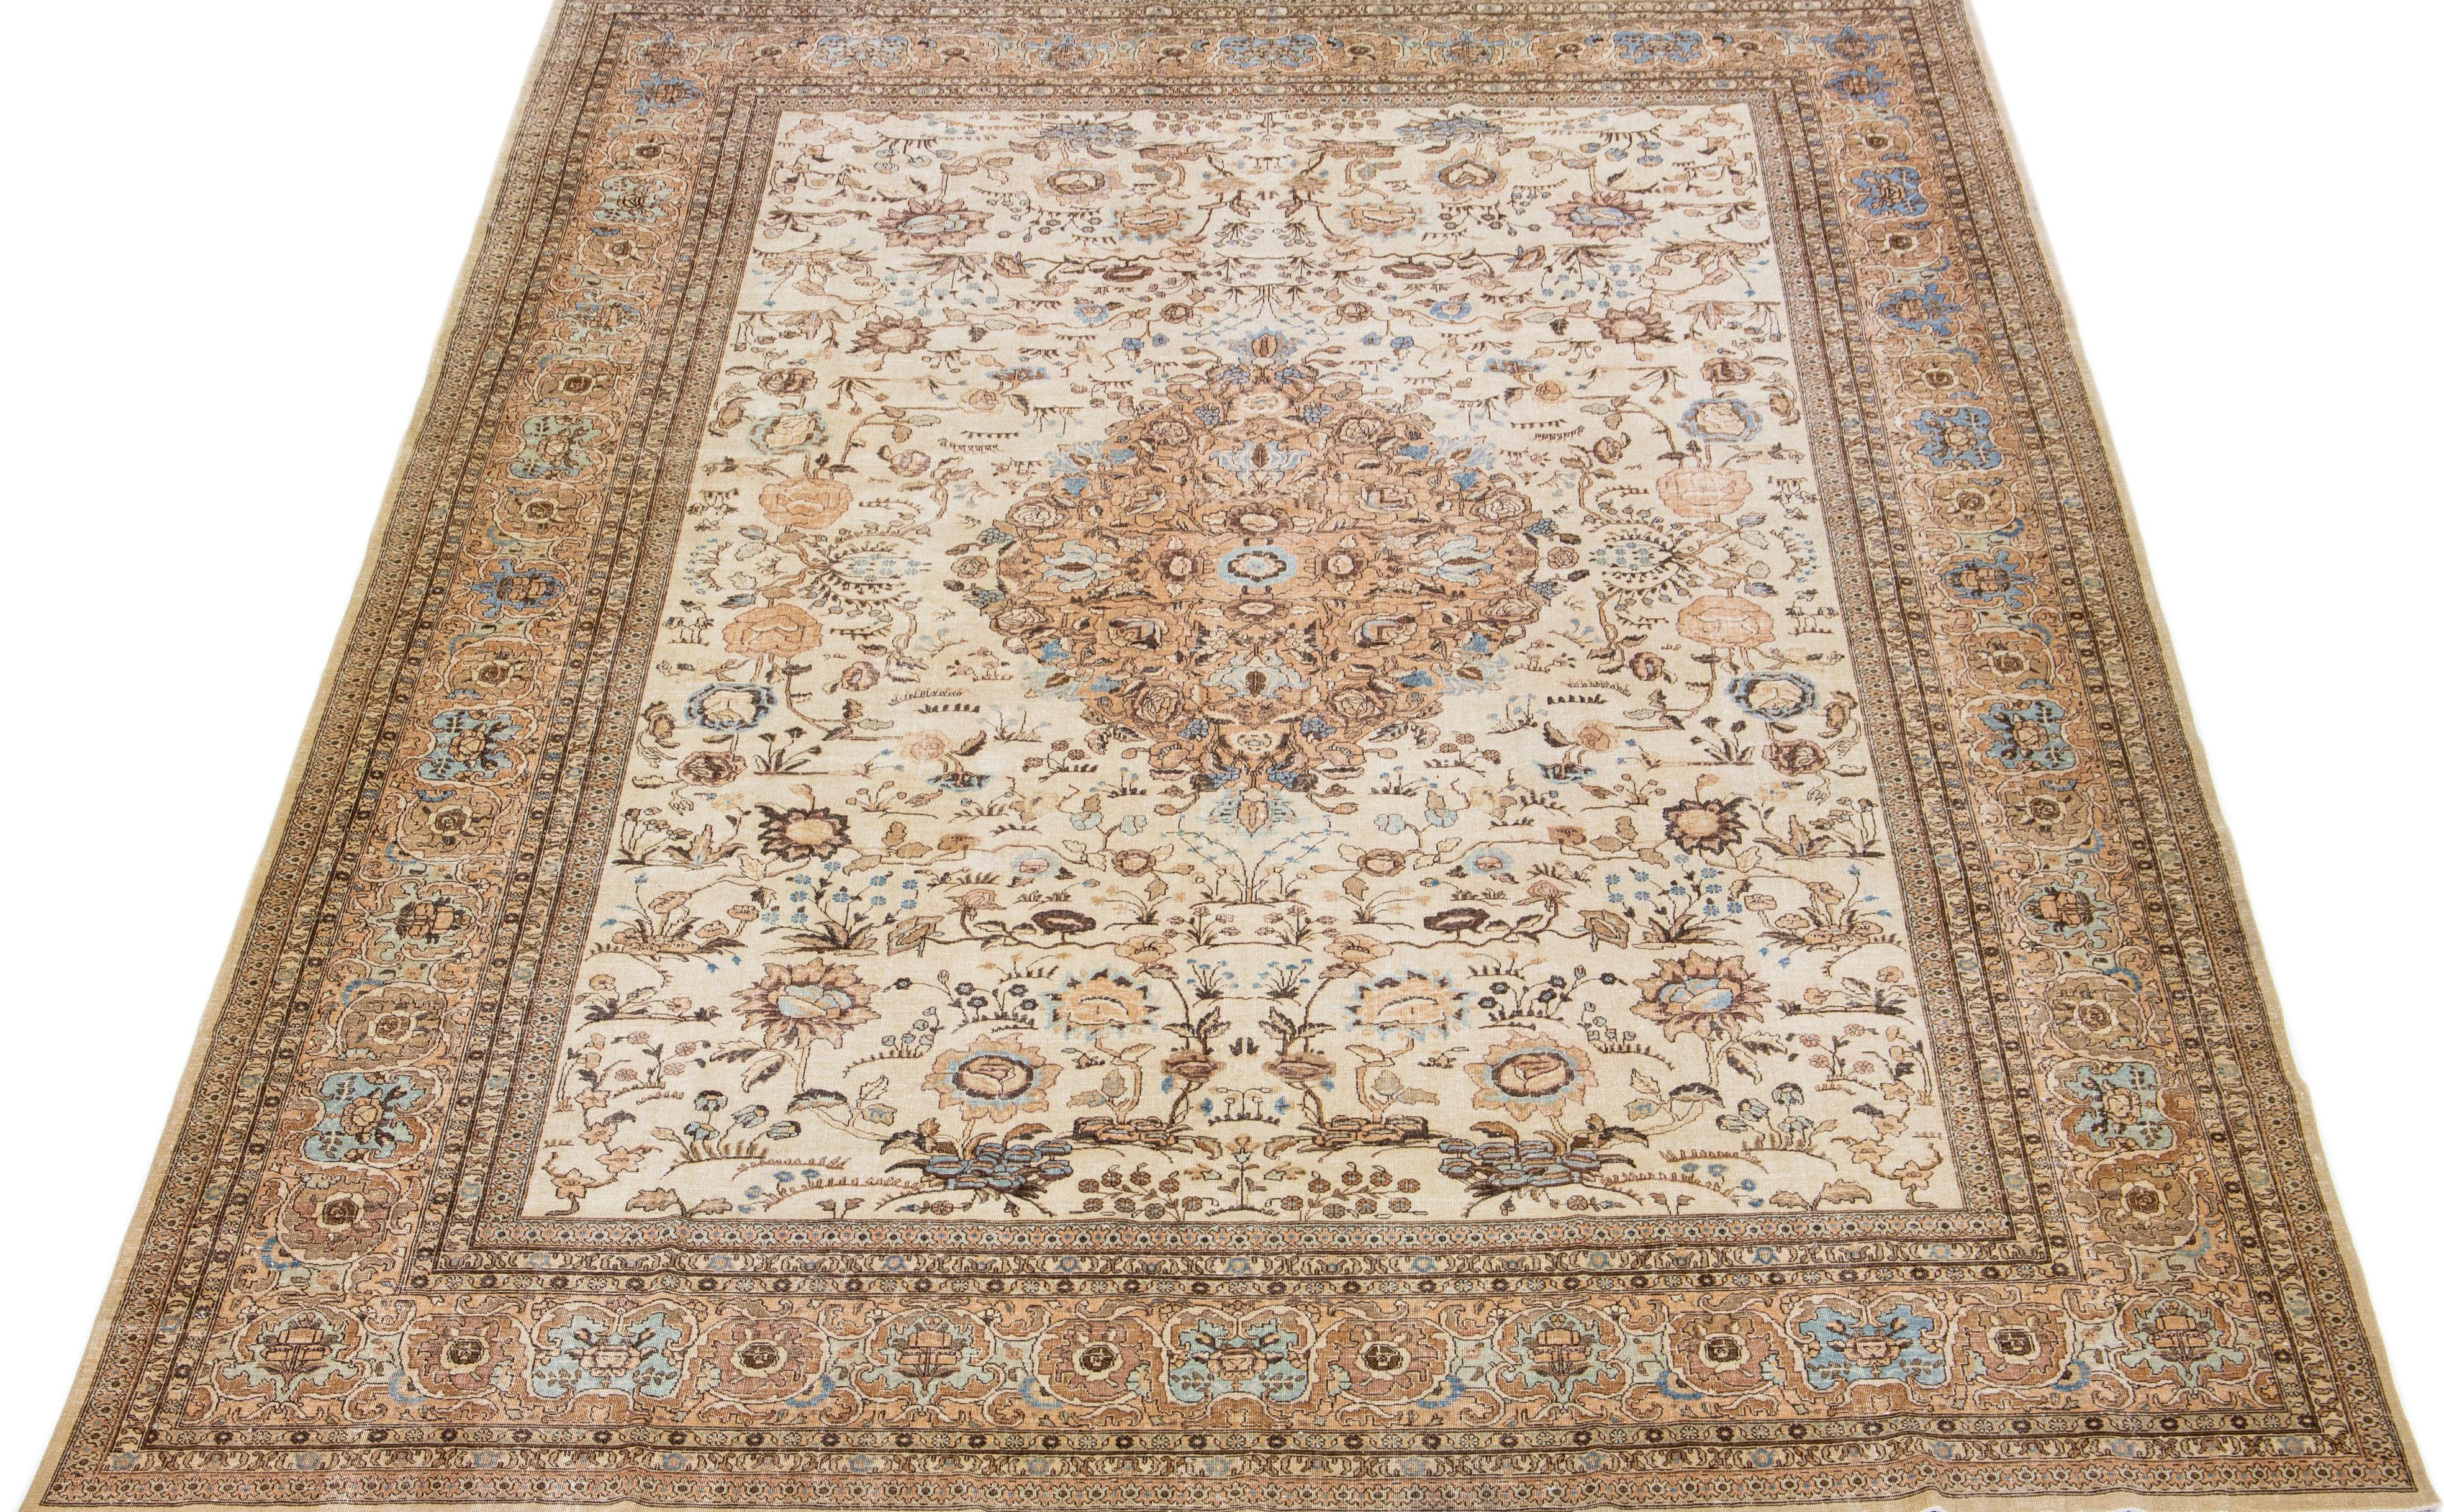 Beautiful antique Persian hand-knotted wool rug with a beige color field. This piece has a tan-designed frame with blue and brown accents in a gorgeous medallion design.

This rug measures: 11'6' x 16'.

Our rugs are professional cleaning before